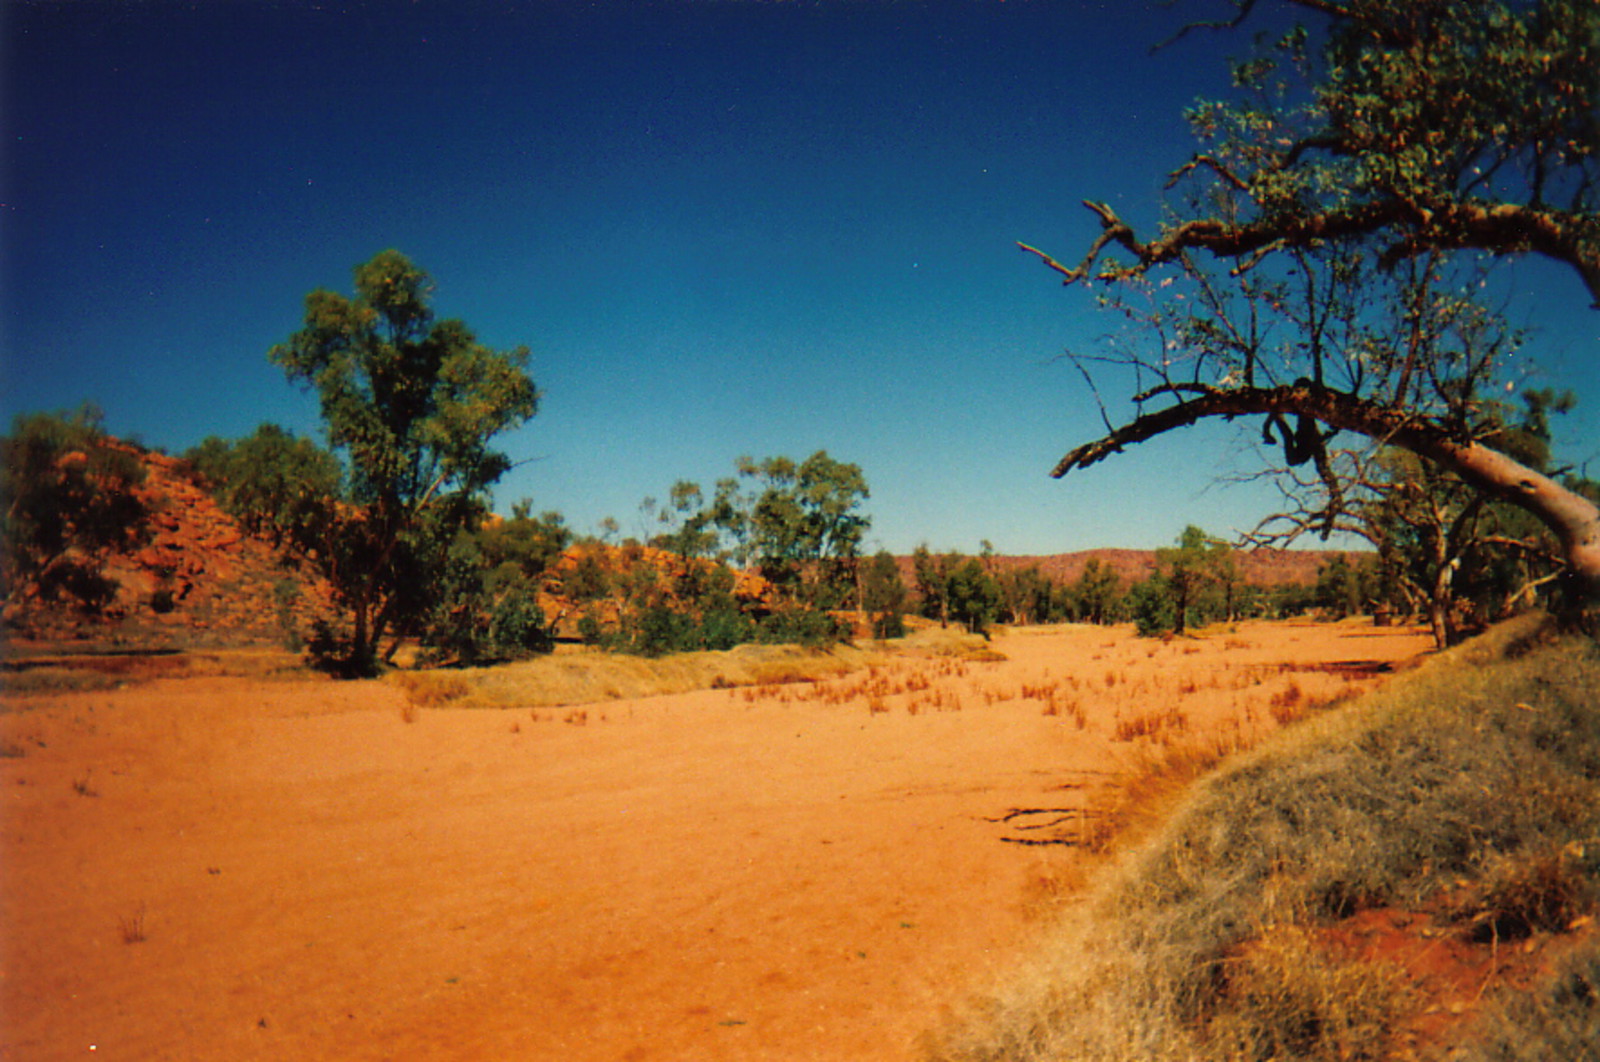 The dry bed of the Todd River